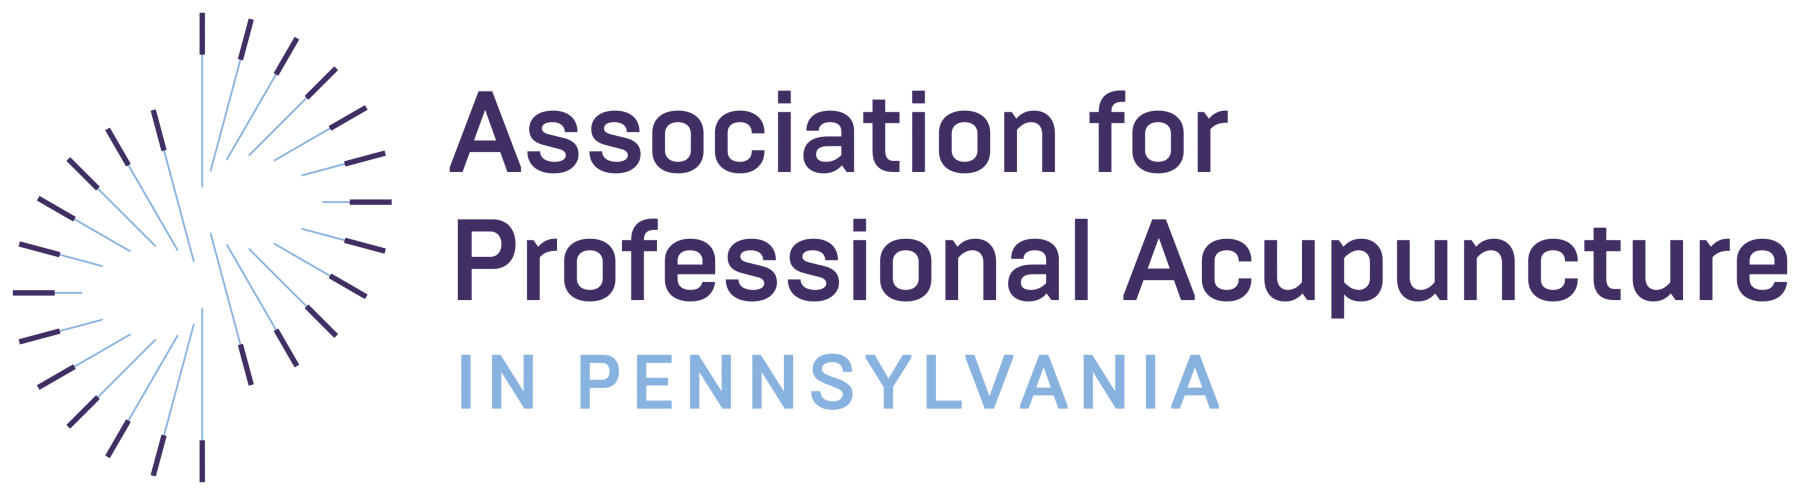 Association for Professional Acupuncture in Pennsylvania